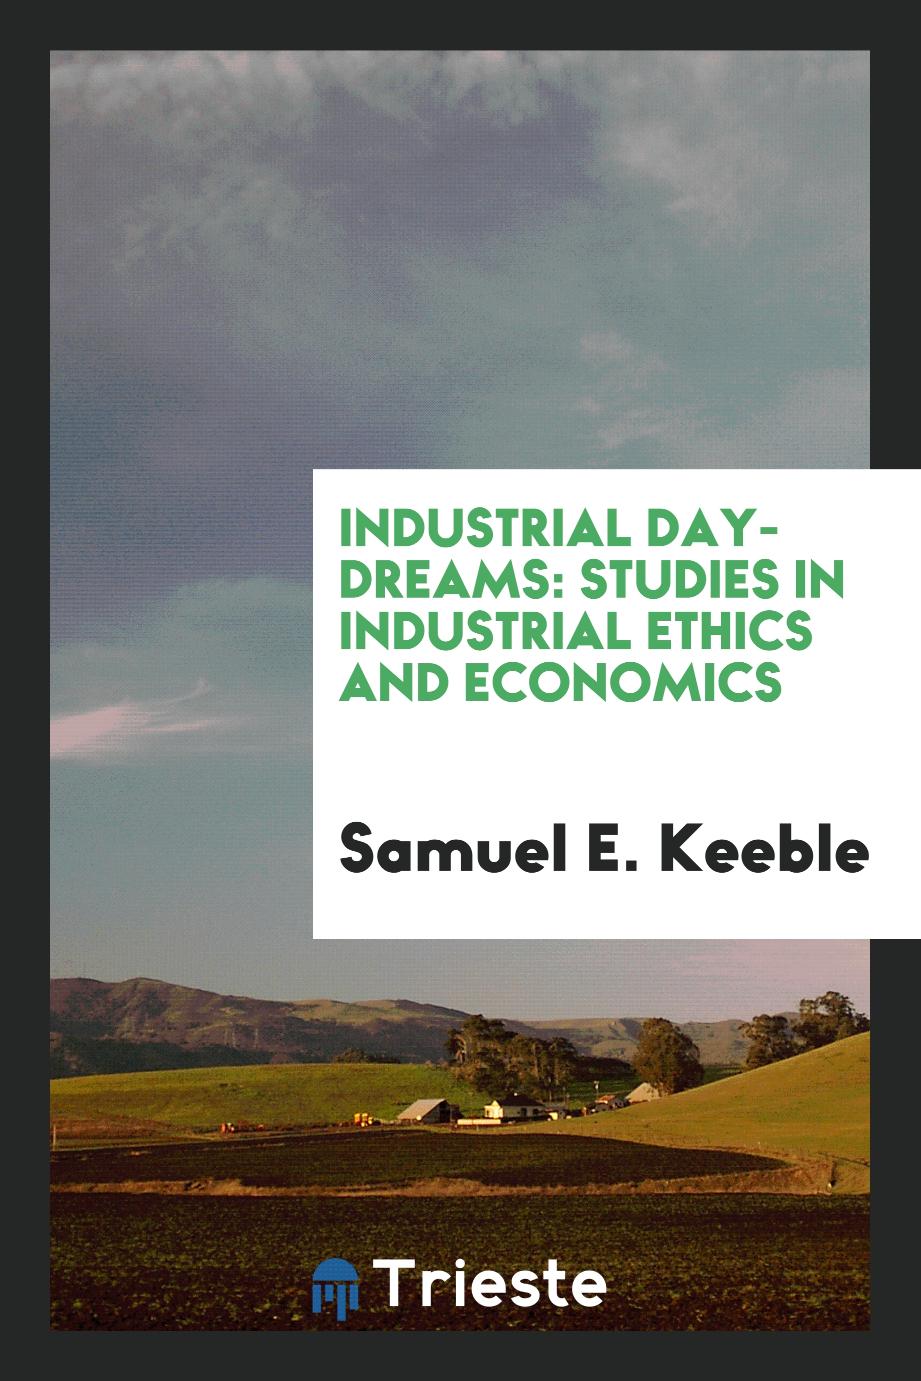 Industrial day-dreams: studies in industrial ethics and economics